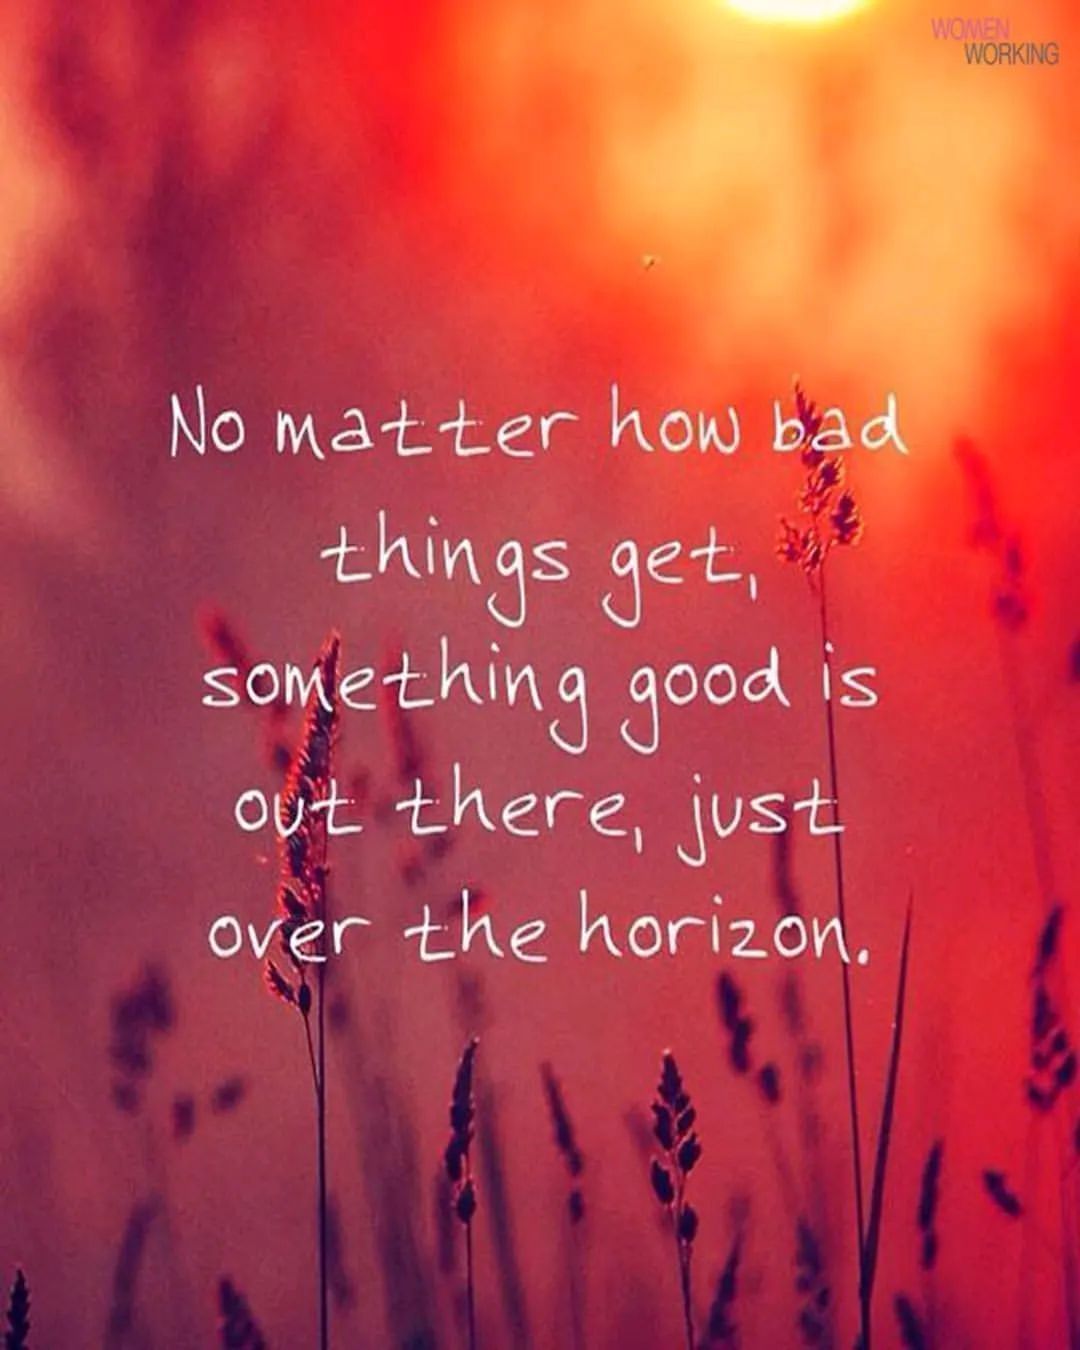 No matter how bad things get, something good is out there, just over the horizon.